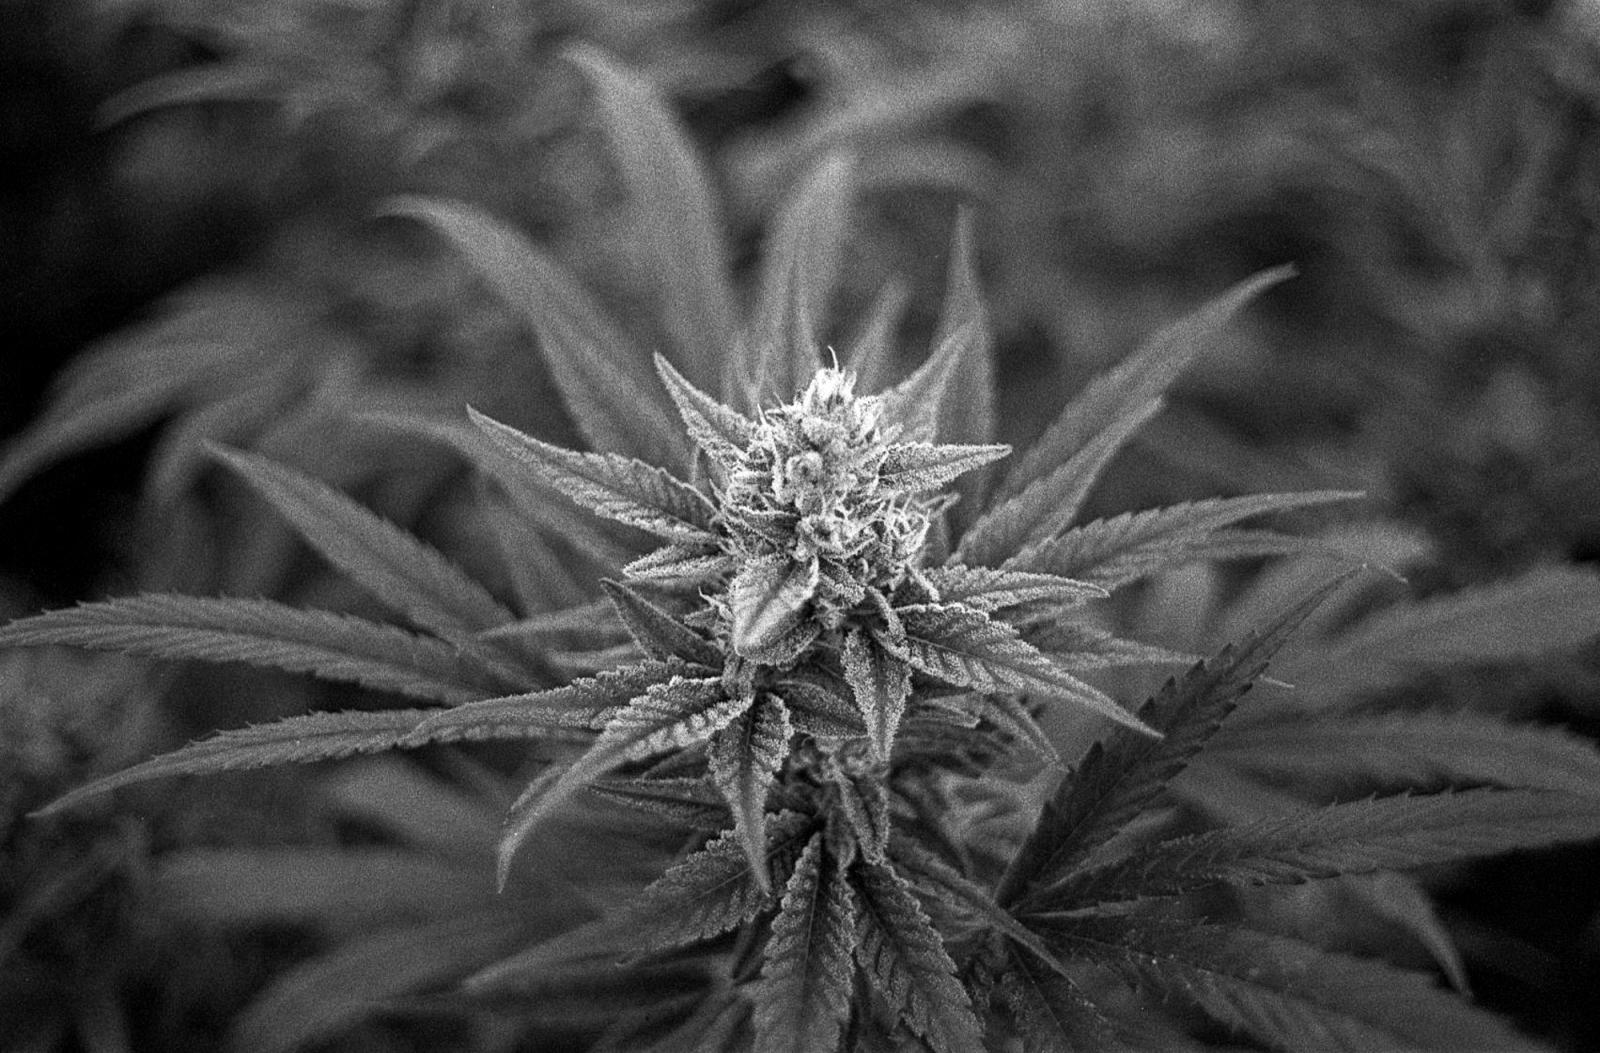 The cannabis flower is the symb...beauty for those who defend it.